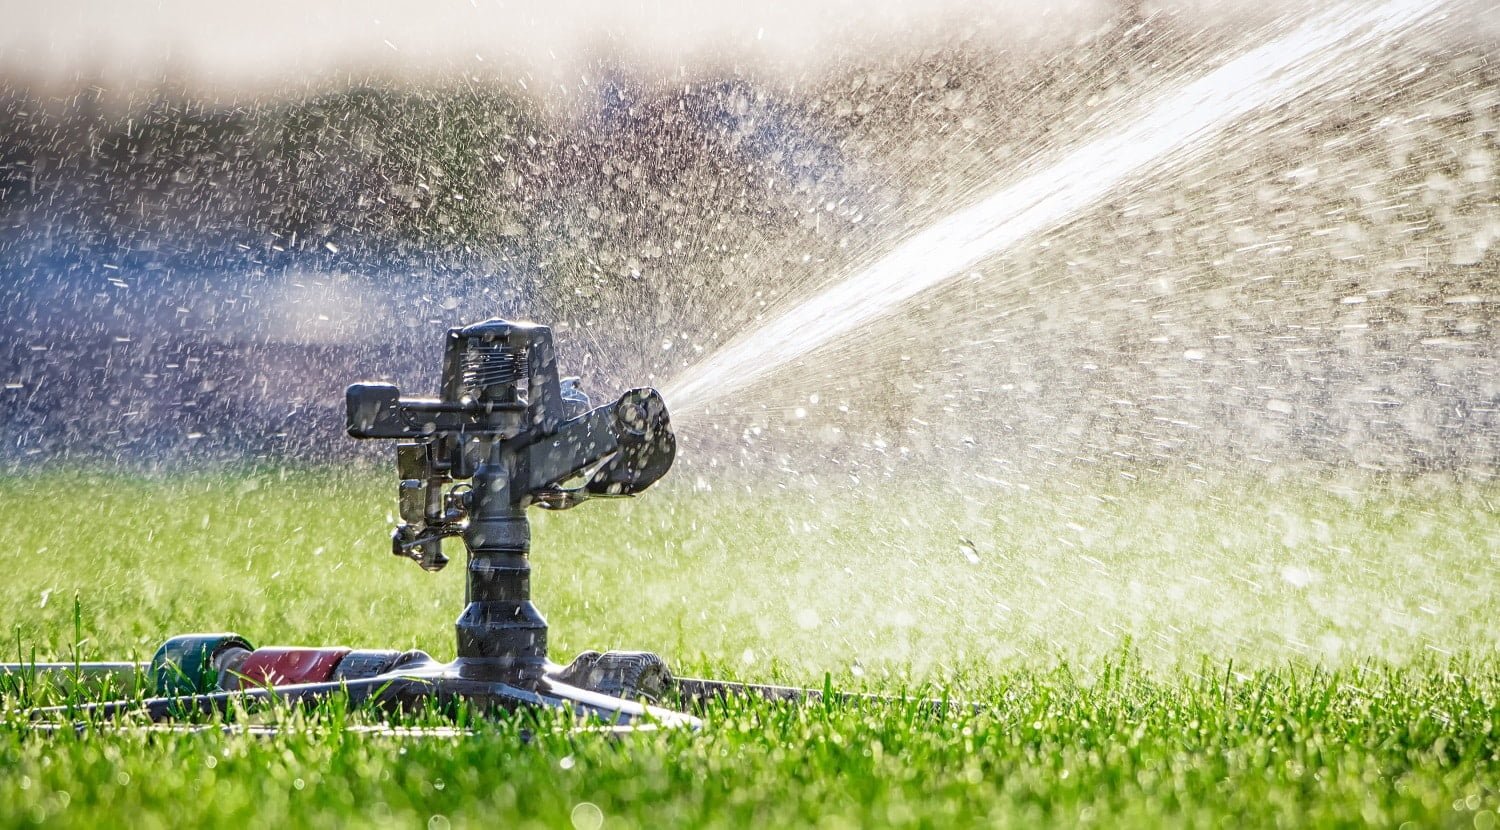 Automatic sprinkler system watering the lawn. close-up. Green grass background.